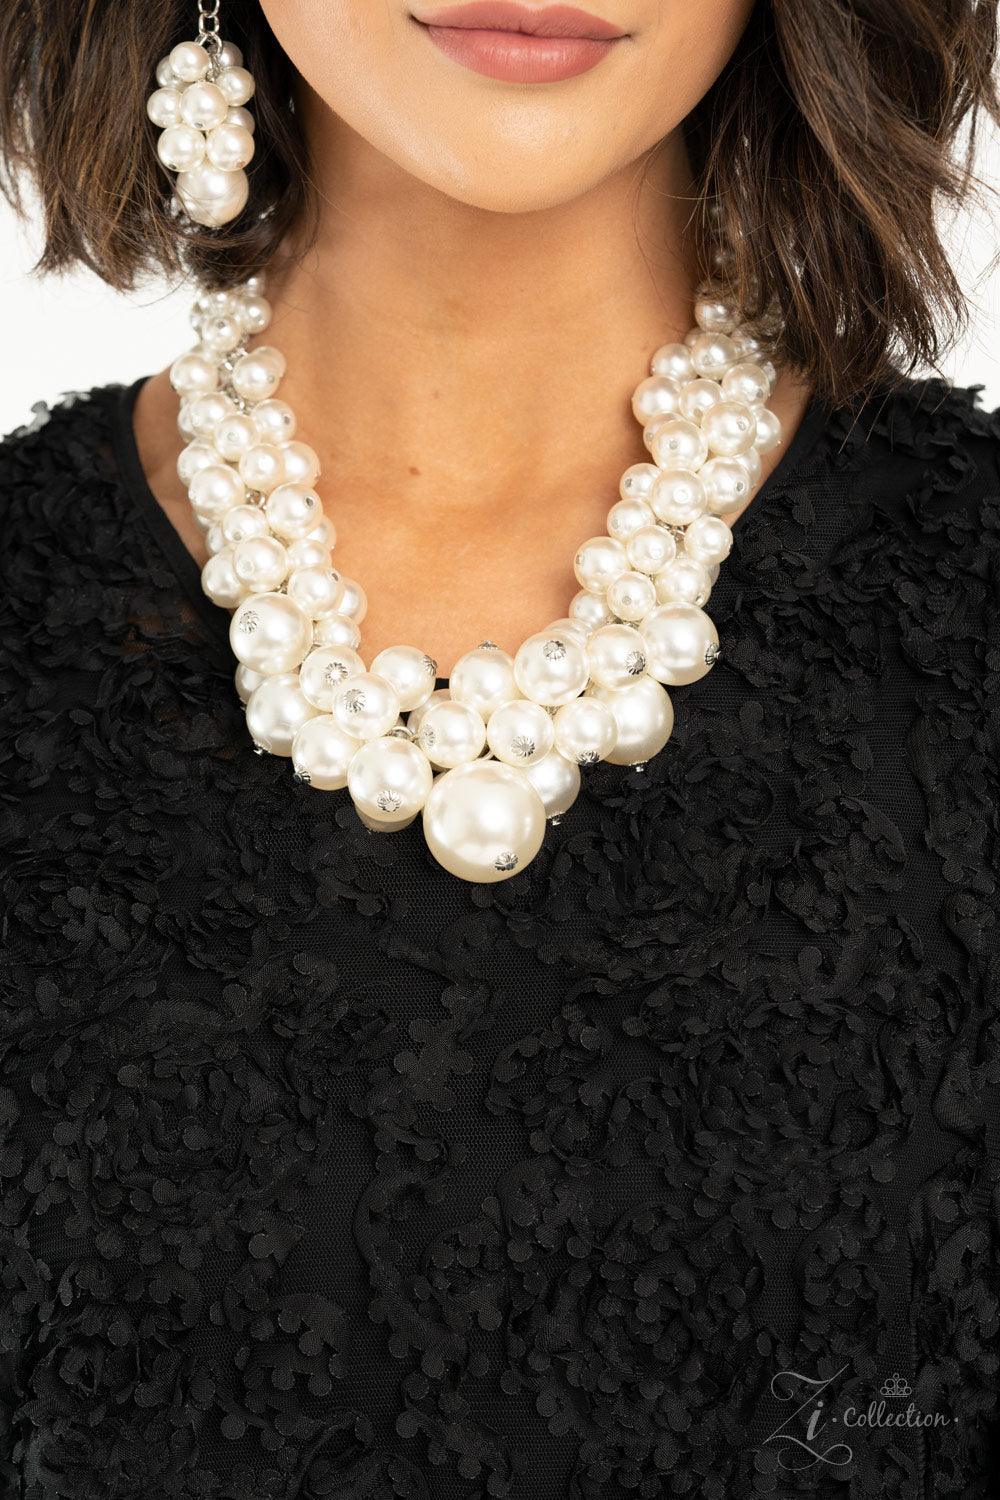 Paparazzi Accessories Regal 💗💗ZiCollection $25💗💗 An exaggerated display of clustered pearls elegantly sweeps below the collar. The classic white pearls gradually increase in bubbly intensity as they reach the center of the regal piece, adding over-the